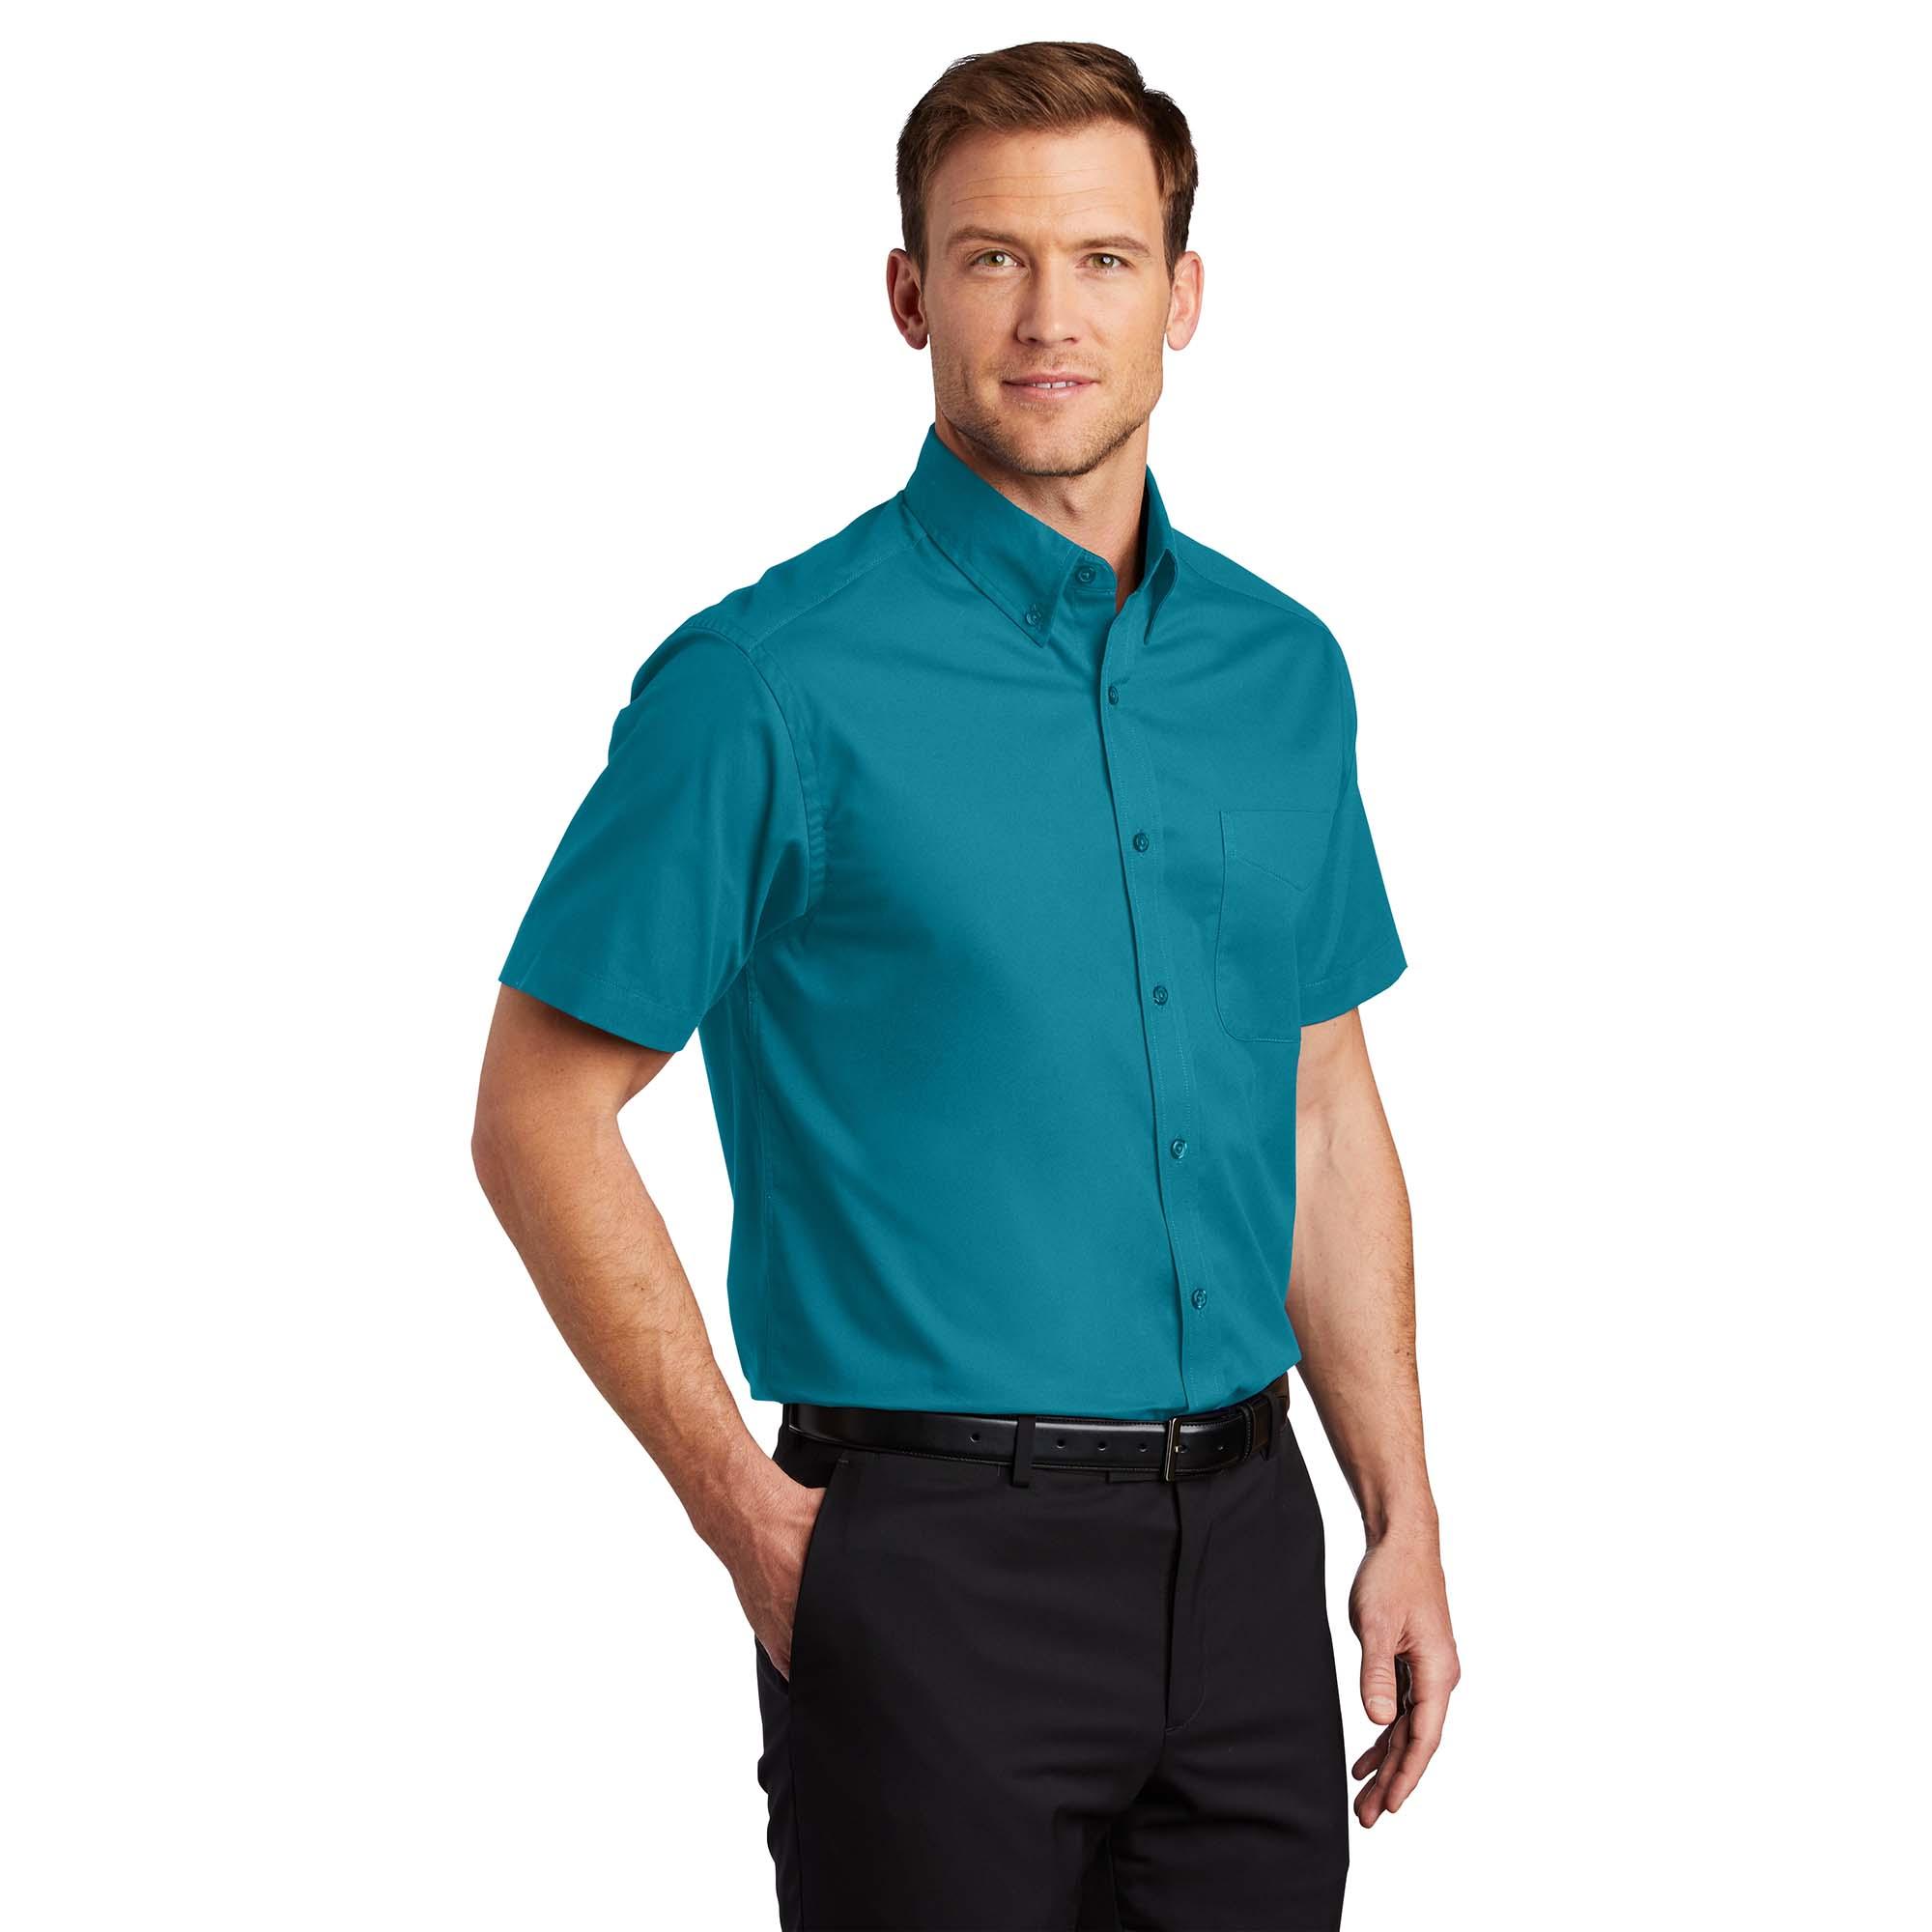 Port Authority S508 Short Sleeve Easy Care Shirt - Teal Green | Full Source